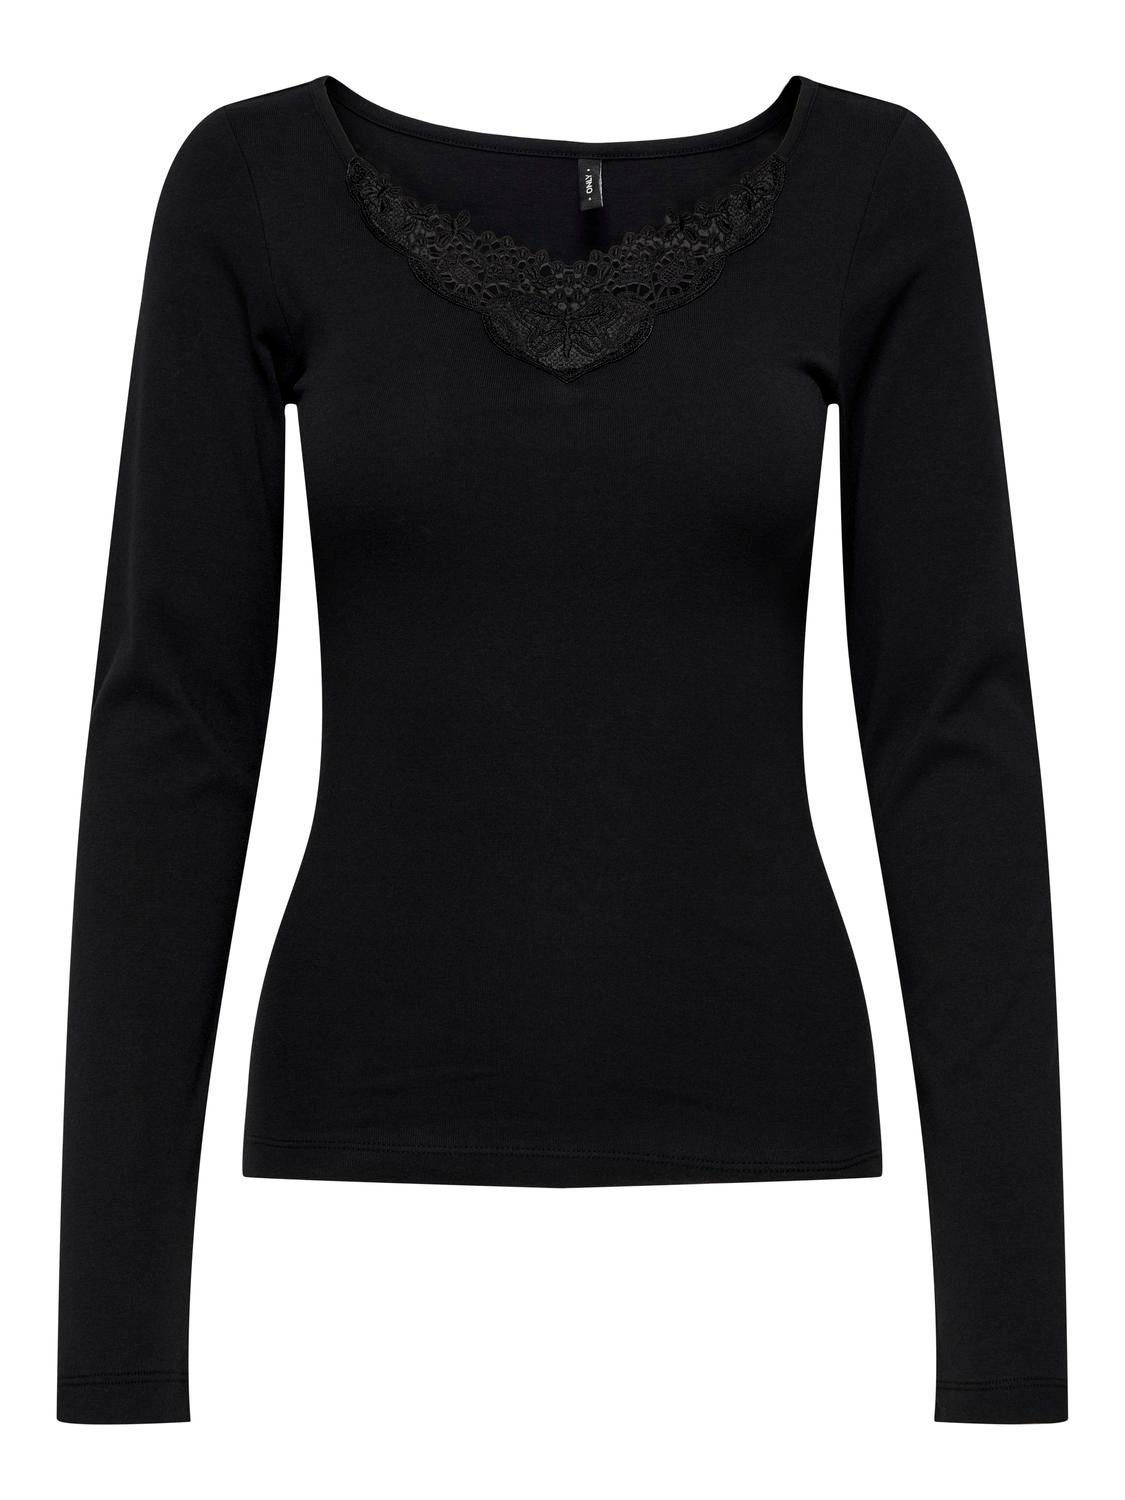 ONLY Long sleeved top with lace neck -Black - 15302894